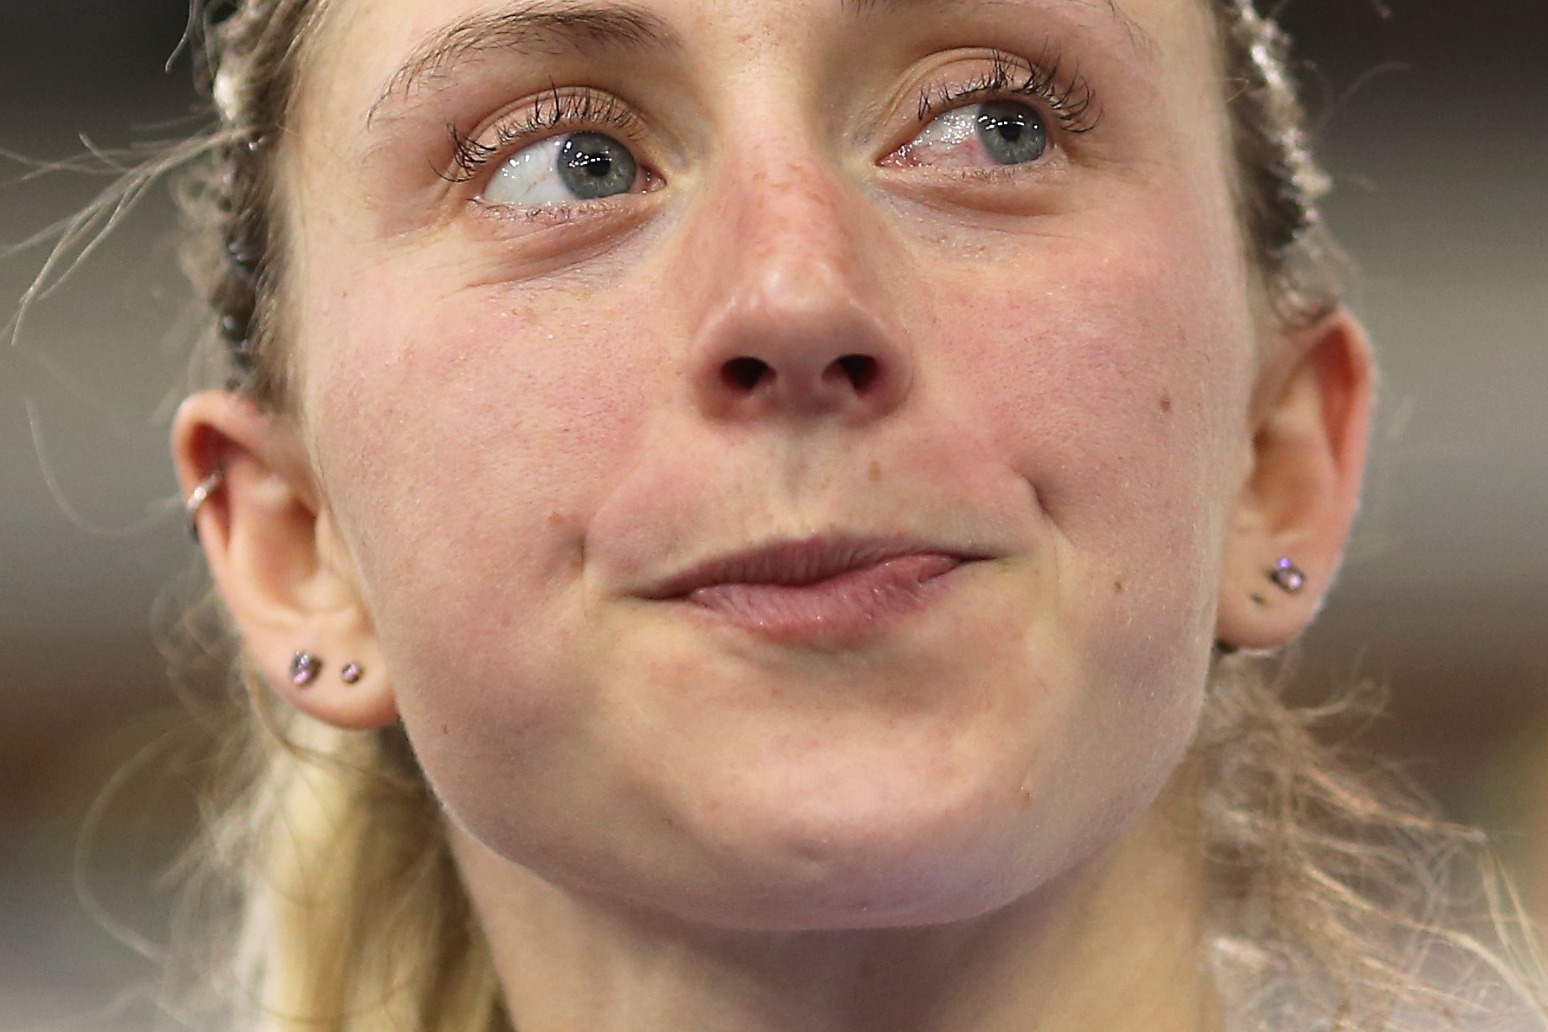 Laura Kenny endured ‘hardest few months’ with miscarriage and ectopic pregnancy 